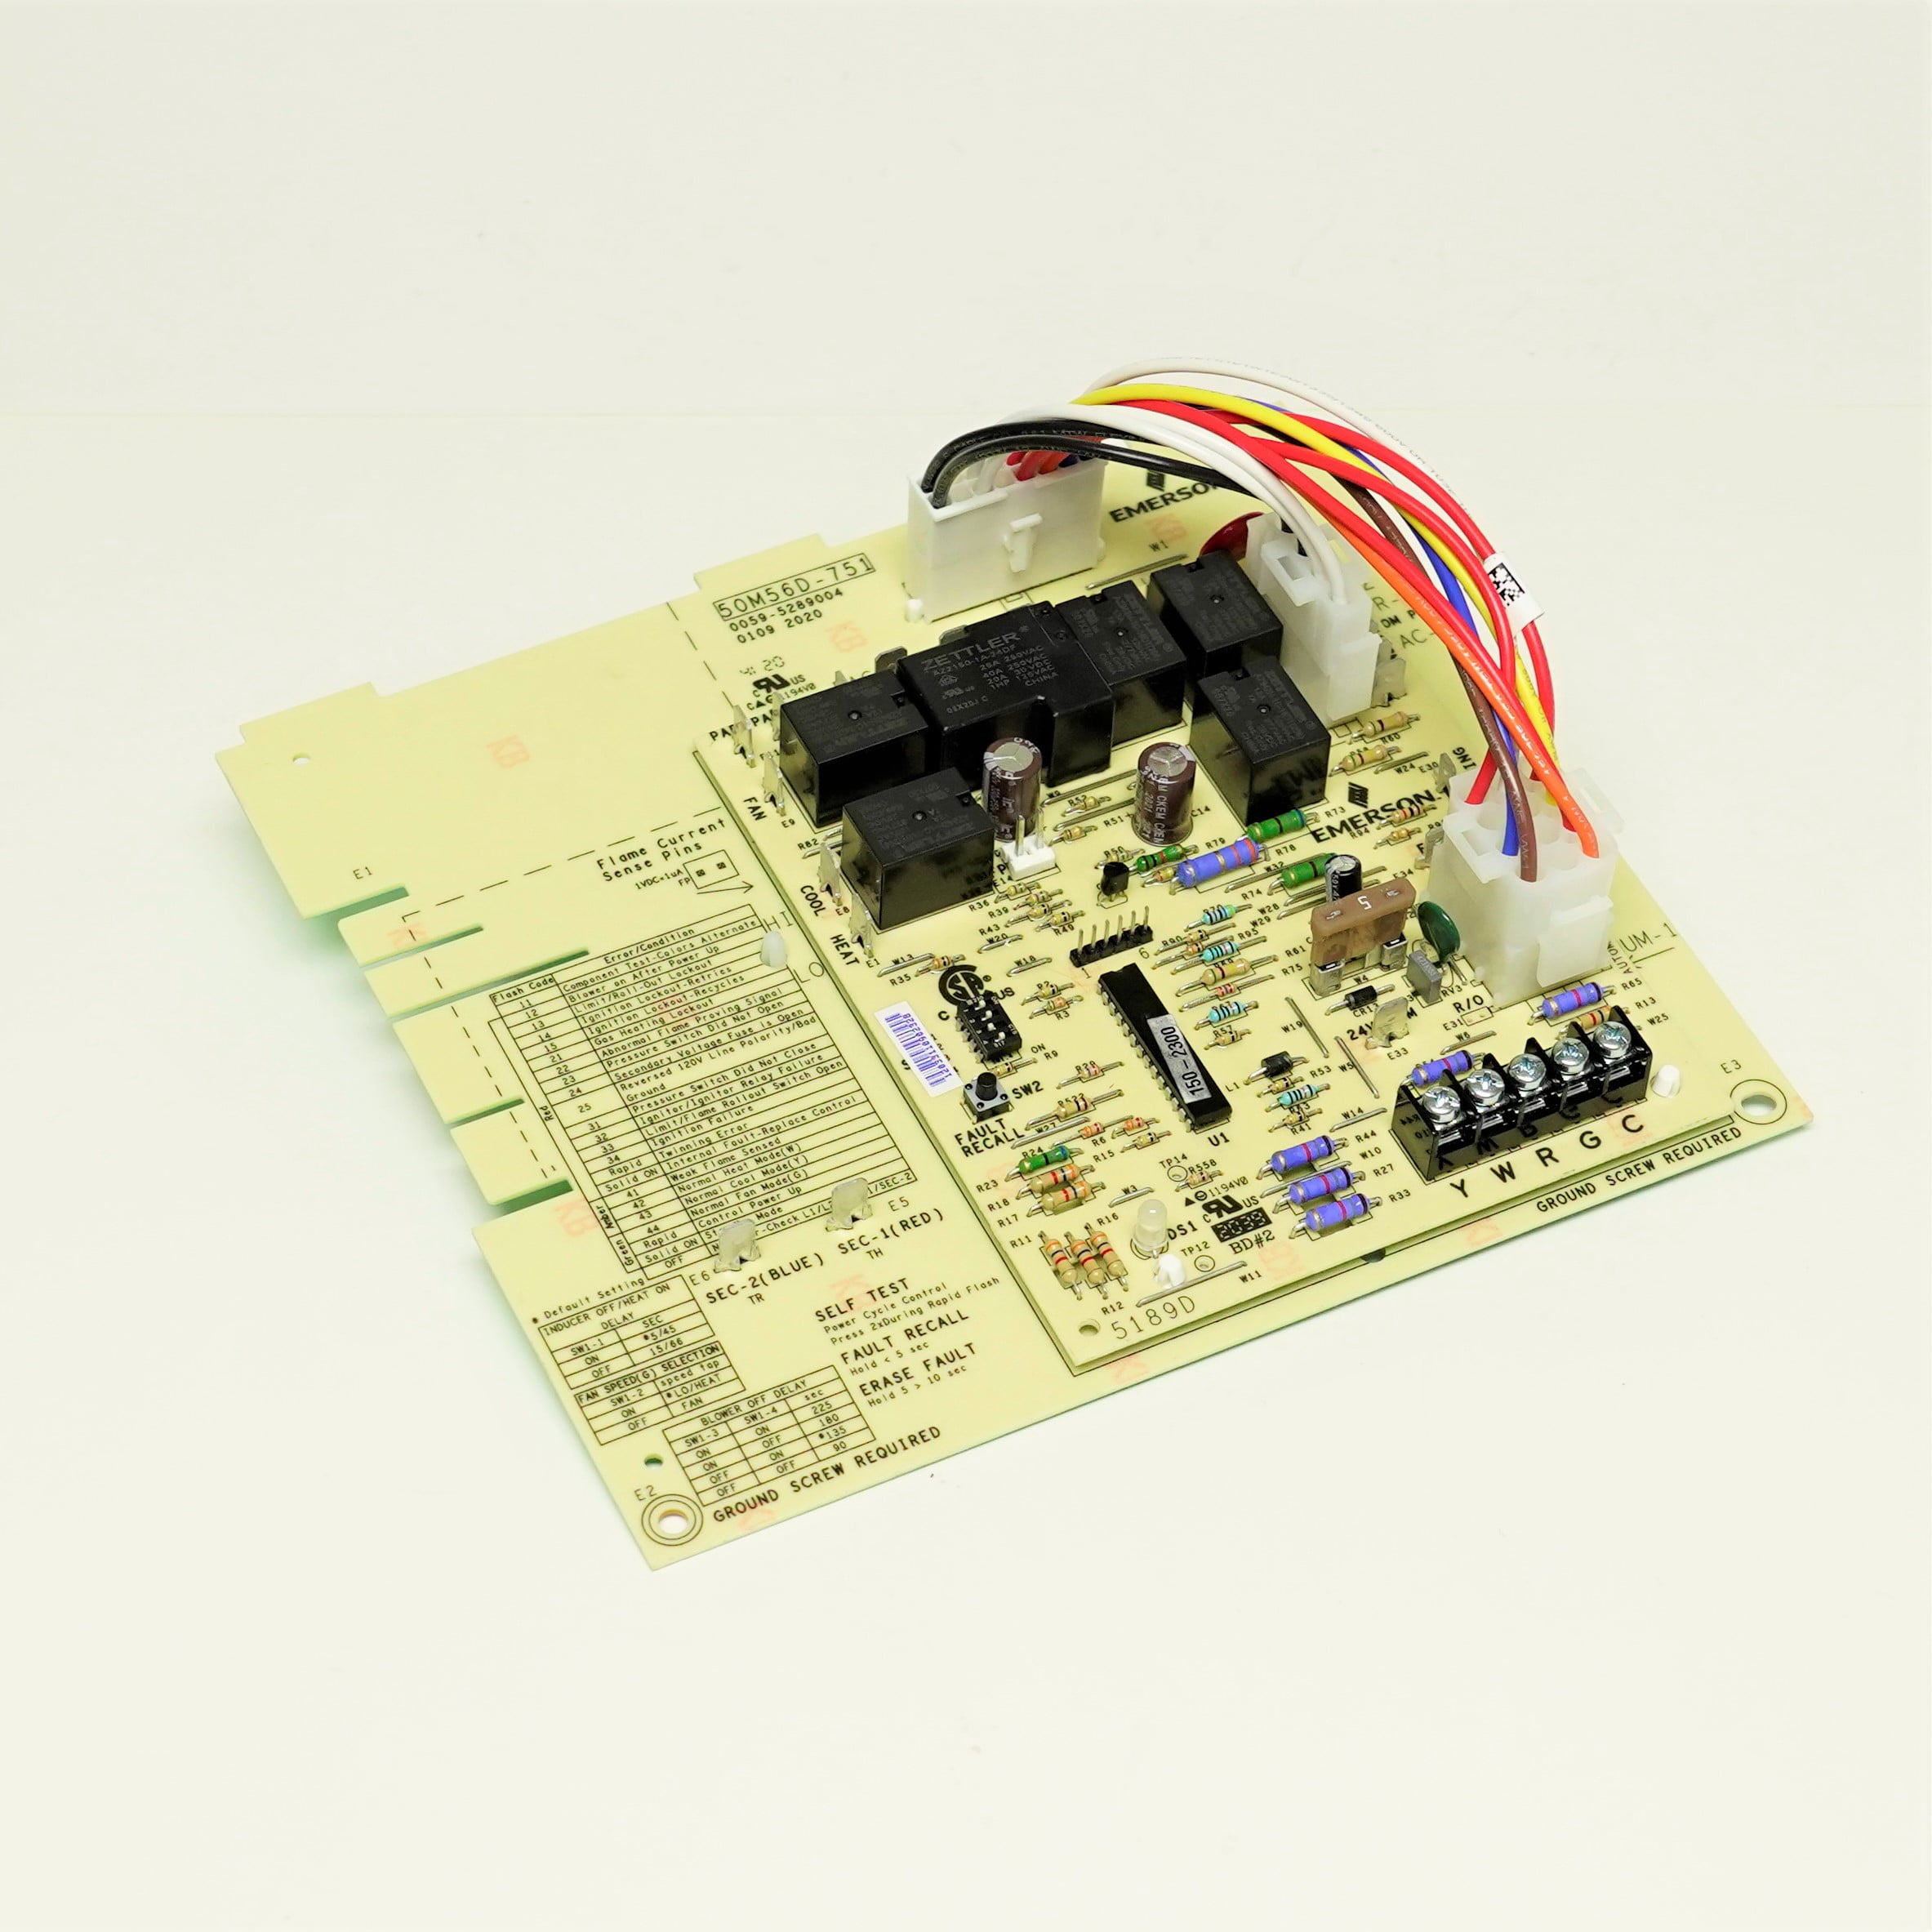 ICM2804 ICM Furnace Control Board for Carrier Bryant Ces0110074-01 for sale online 